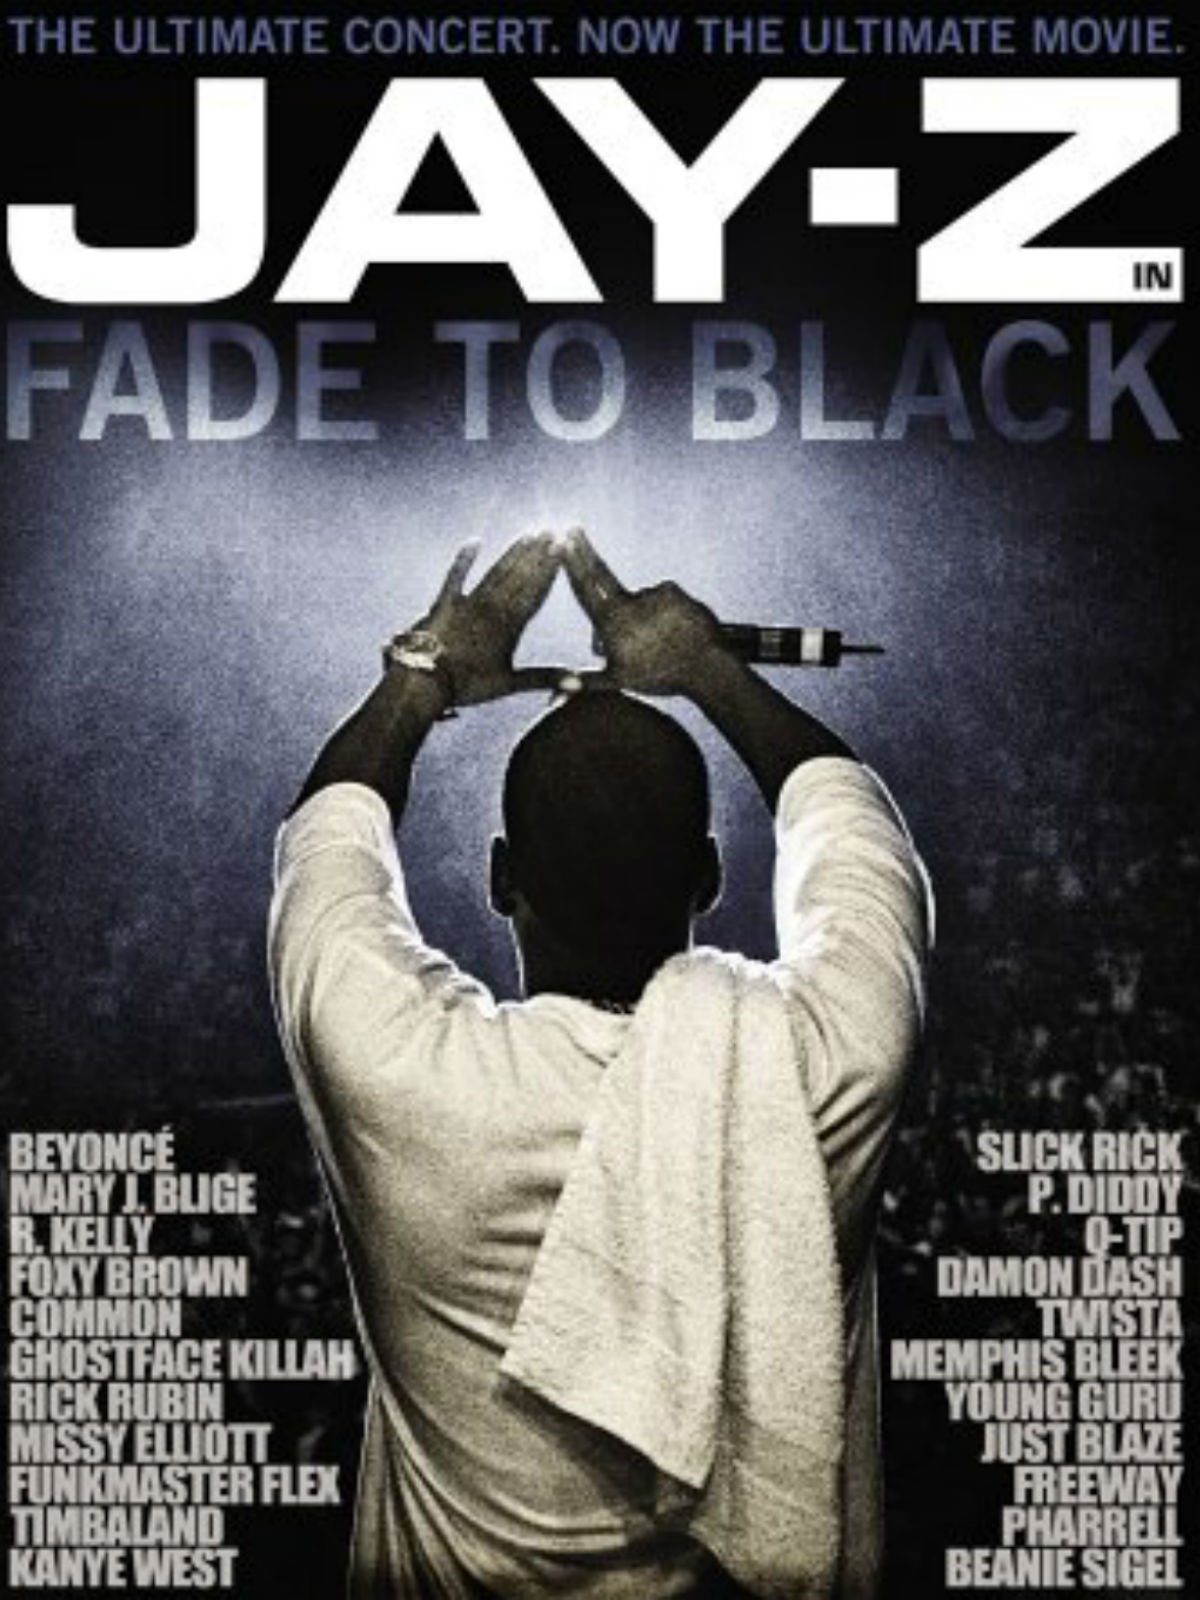 download jay z fade to black full movie